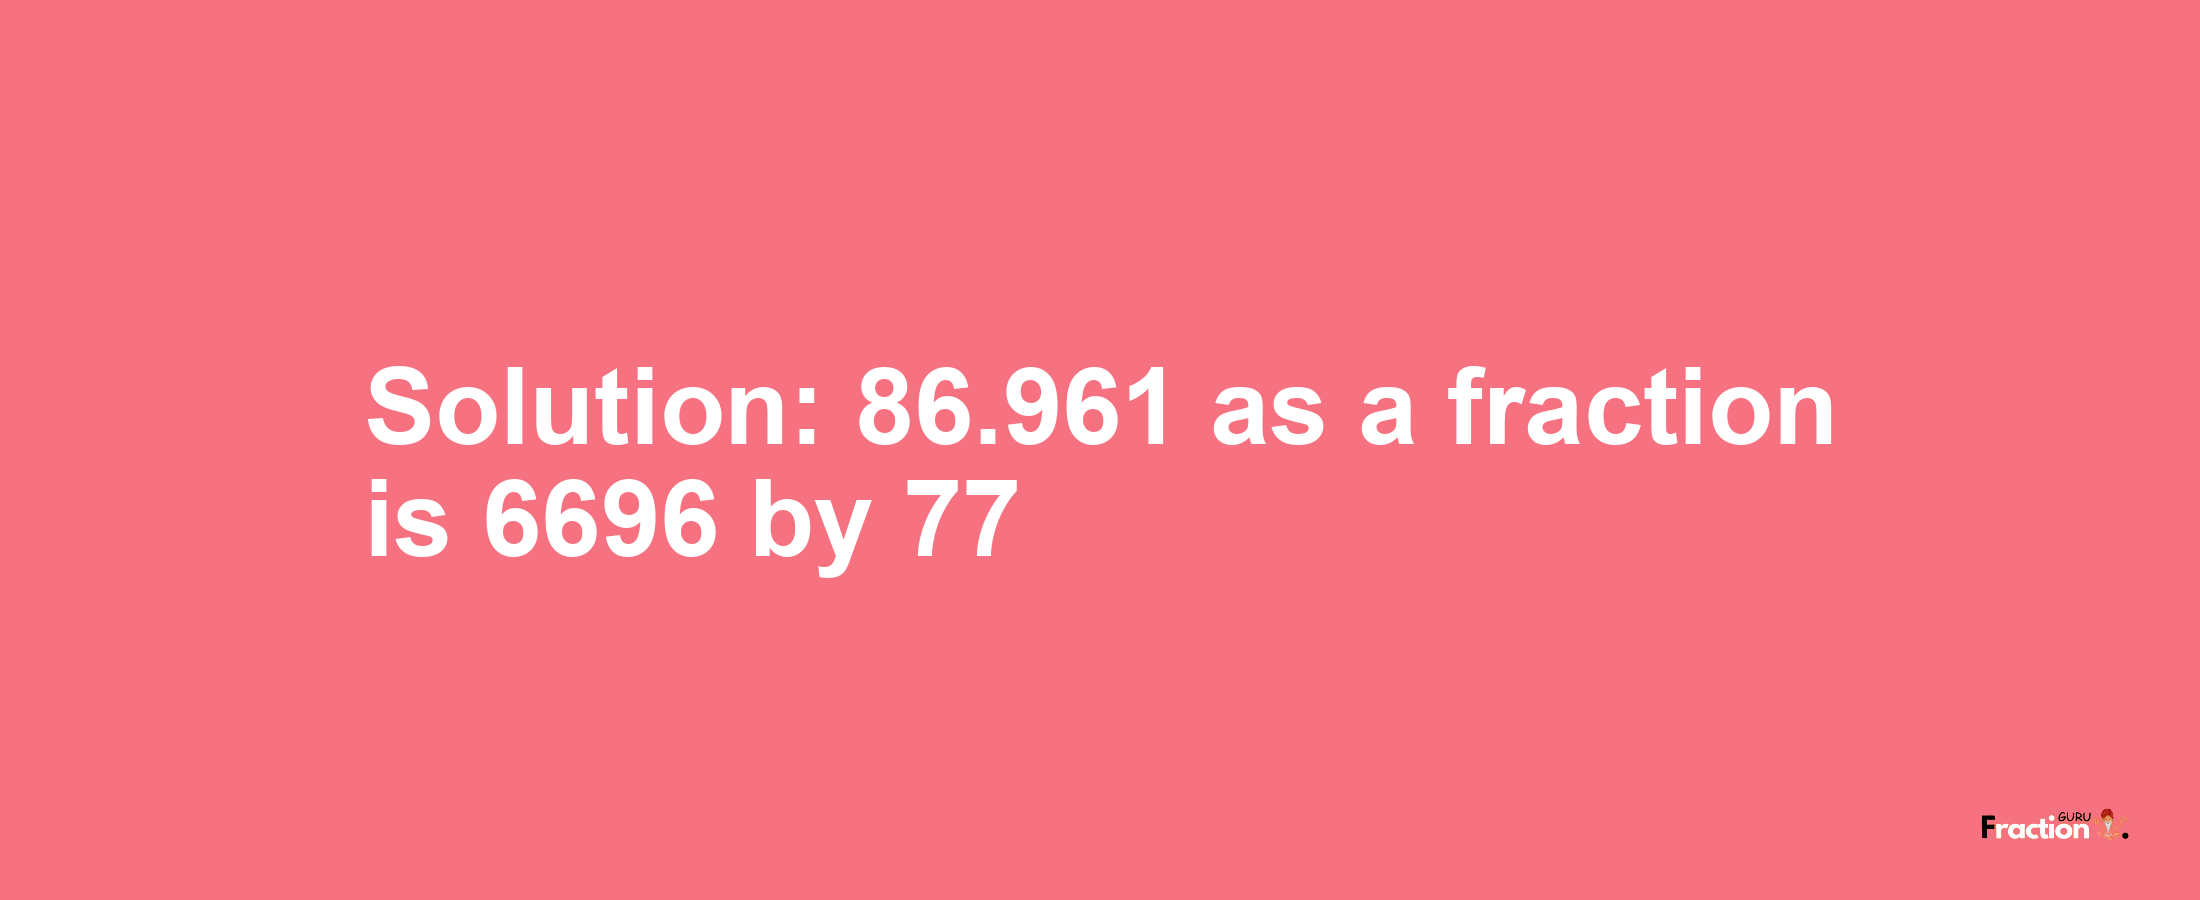 Solution:86.961 as a fraction is 6696/77